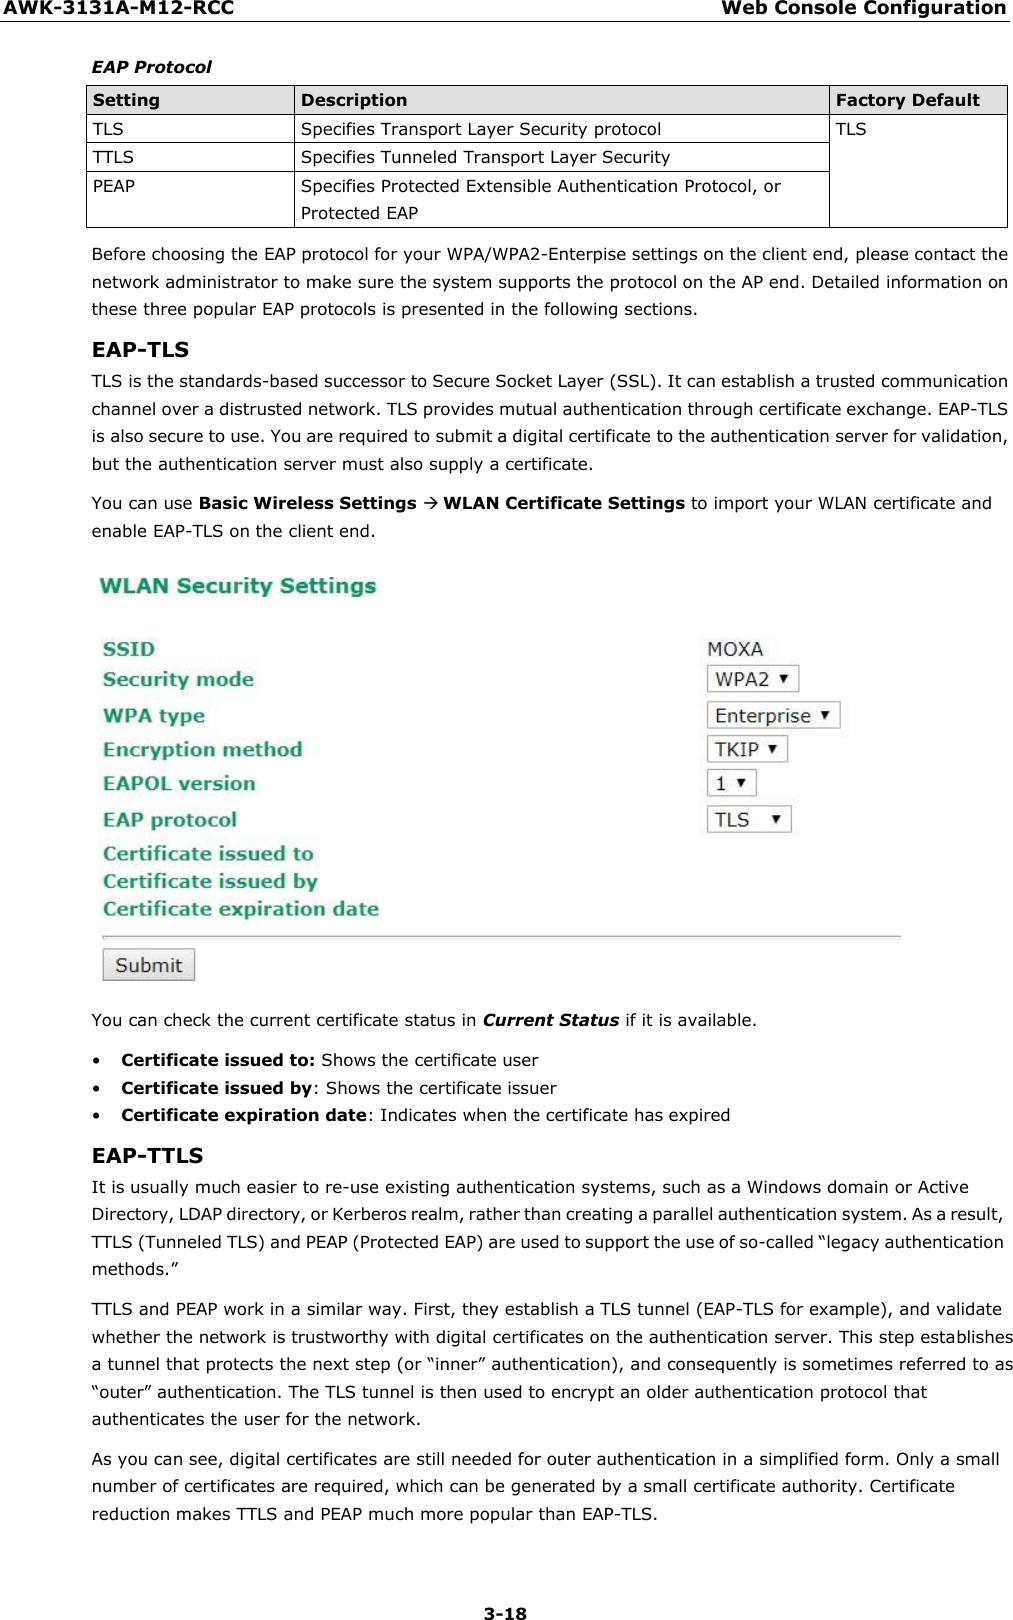 3-18 AWK-3131A-M12-RCC Web Console Configuration    EAP Protocol  Setting Description Factory Default TLS Specifies Transport Layer Security protocol TLS TTLS Specifies Tunneled Transport Layer Security PEAP Specifies Protected Extensible Authentication Protocol, or Protected EAP Before choosing the EAP protocol for your WPA/WPA2-Enterpise settings on the client end, please contact the network administrator to make sure the system supports the protocol on the AP end. Detailed information on these three popular EAP protocols is presented in the following sections. EAP-TLS TLS is the standards-based successor to Secure Socket Layer (SSL). It can establish a trusted communication channel over a distrusted network. TLS provides mutual authentication through certificate exchange. EAP-TLS is also secure to use. You are required to submit a digital certificate to the authentication server for validation, but the authentication server must also supply a certificate. You can use Basic Wireless Settings  WLAN Certificate Settings to import your WLAN certificate and enable EAP-TLS on the client end.   You can check the current certificate status in Current Status if it is available.  • Certificate issued to: Shows the certificate user • Certificate issued by: Shows the certificate issuer • Certificate expiration date: Indicates when the certificate has expired EAP-TTLS It is usually much easier to re-use existing authentication systems, such as a Windows domain or Active Directory, LDAP directory, or Kerberos realm, rather than creating a parallel authentication system. As a result, TTLS (Tunneled TLS) and PEAP (Protected EAP) are used to support the use of so-called “legacy authentication methods.” TTLS and PEAP work in a similar way. First, they establish a TLS tunnel (EAP-TLS for example), and validate whether the network is trustworthy with digital certificates on the authentication server. This step establishes a tunnel that protects the next step (or “inner” authentication), and consequently is sometimes referred to as “outer” authentication. The TLS tunnel is then used to encrypt an older authentication protocol that authenticates the user for the network. As you can see, digital certificates are still needed for outer authentication in a simplified form. Only a small number of certificates are required, which can be generated by a small certificate authority. Certificate reduction makes TTLS and PEAP much more popular than EAP-TLS. 